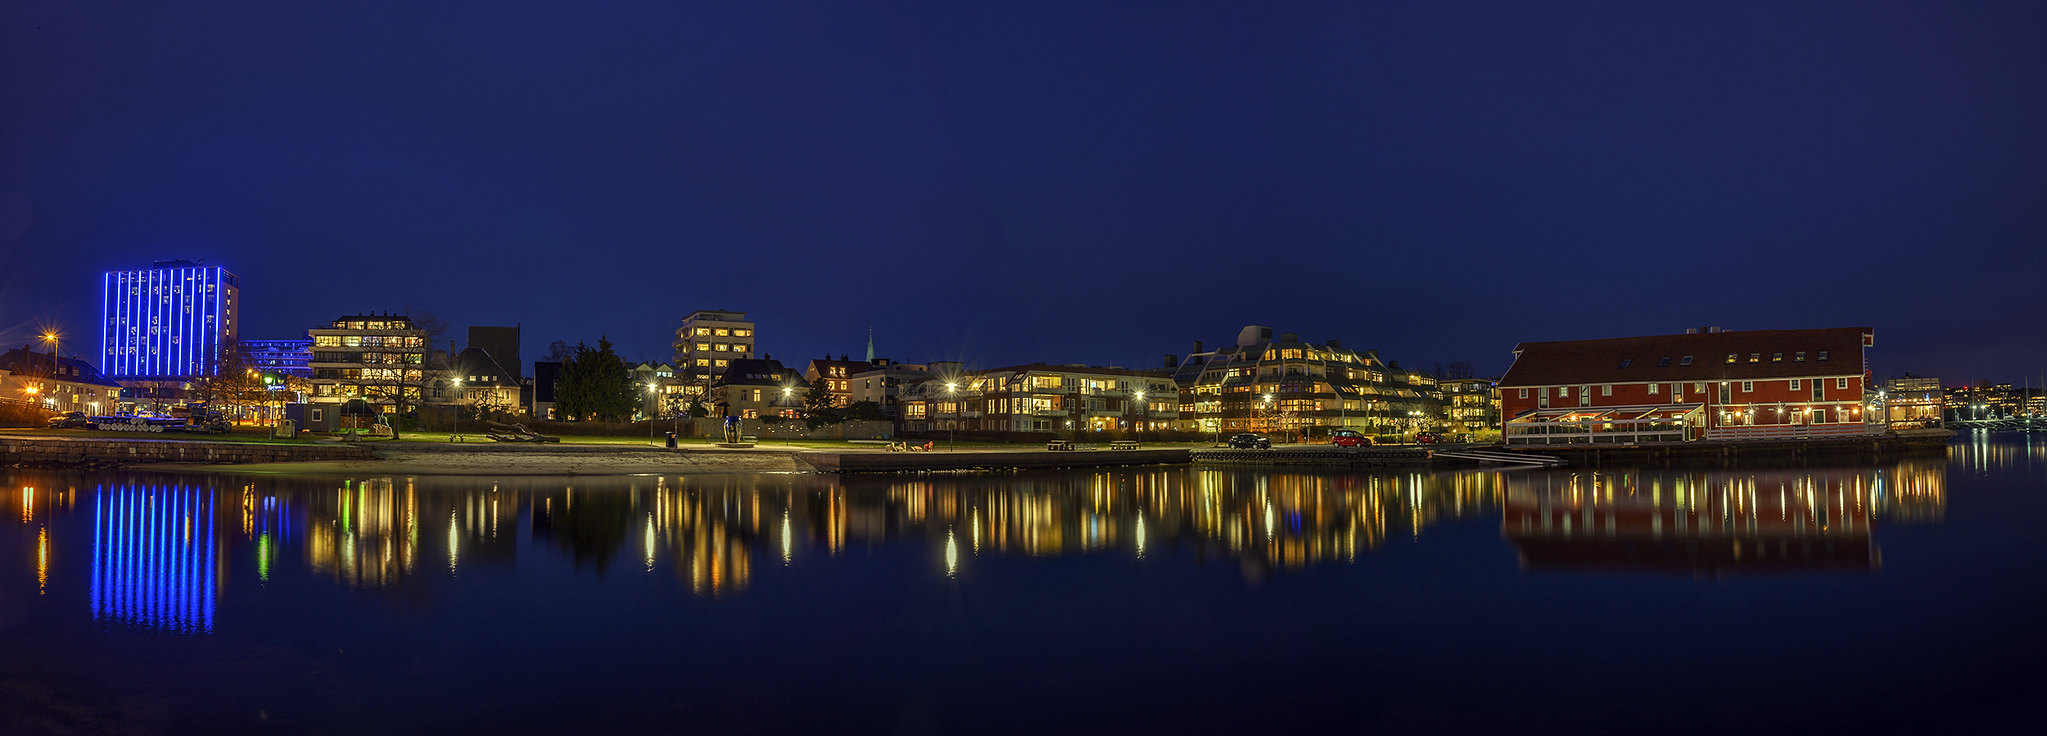 Kristiansand waterfront by night. The conference hotel to the left.                          Photo: Gorm Helge Grønli Rudschinat